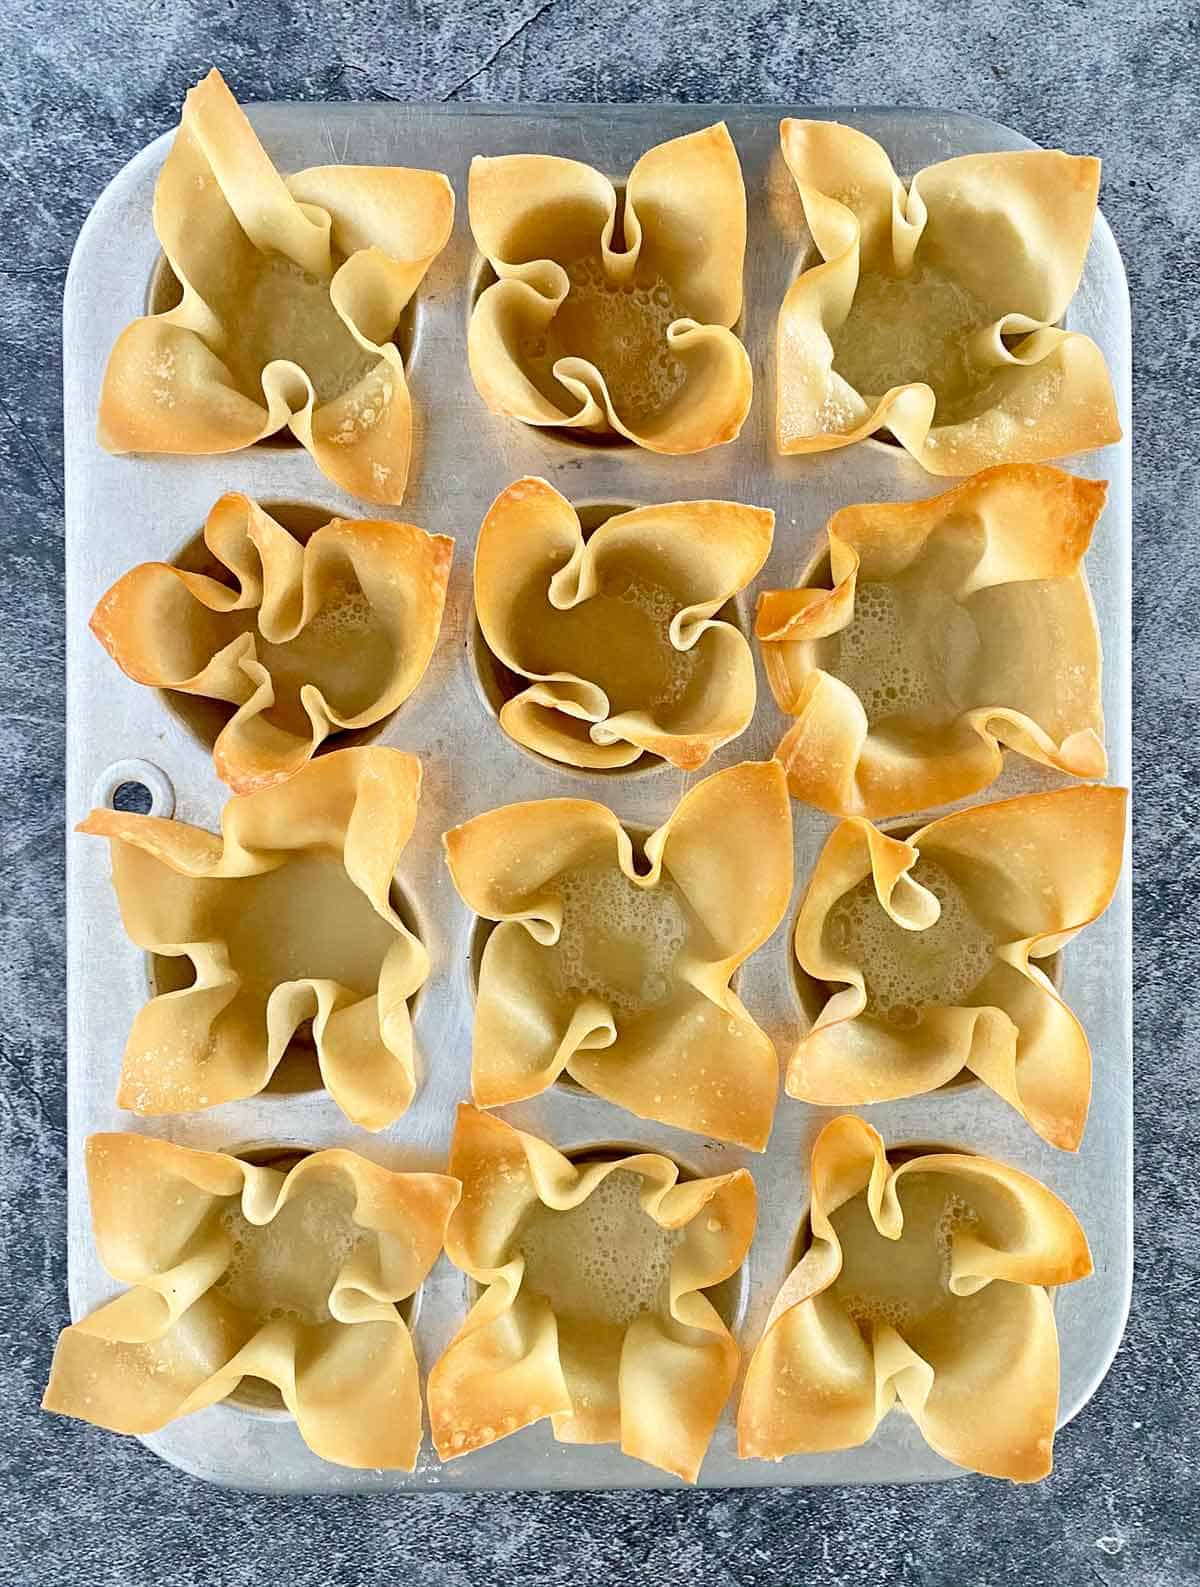 A dozen golden brown baked wonton cups ready to be filled with jalapeno popper bacon filling.